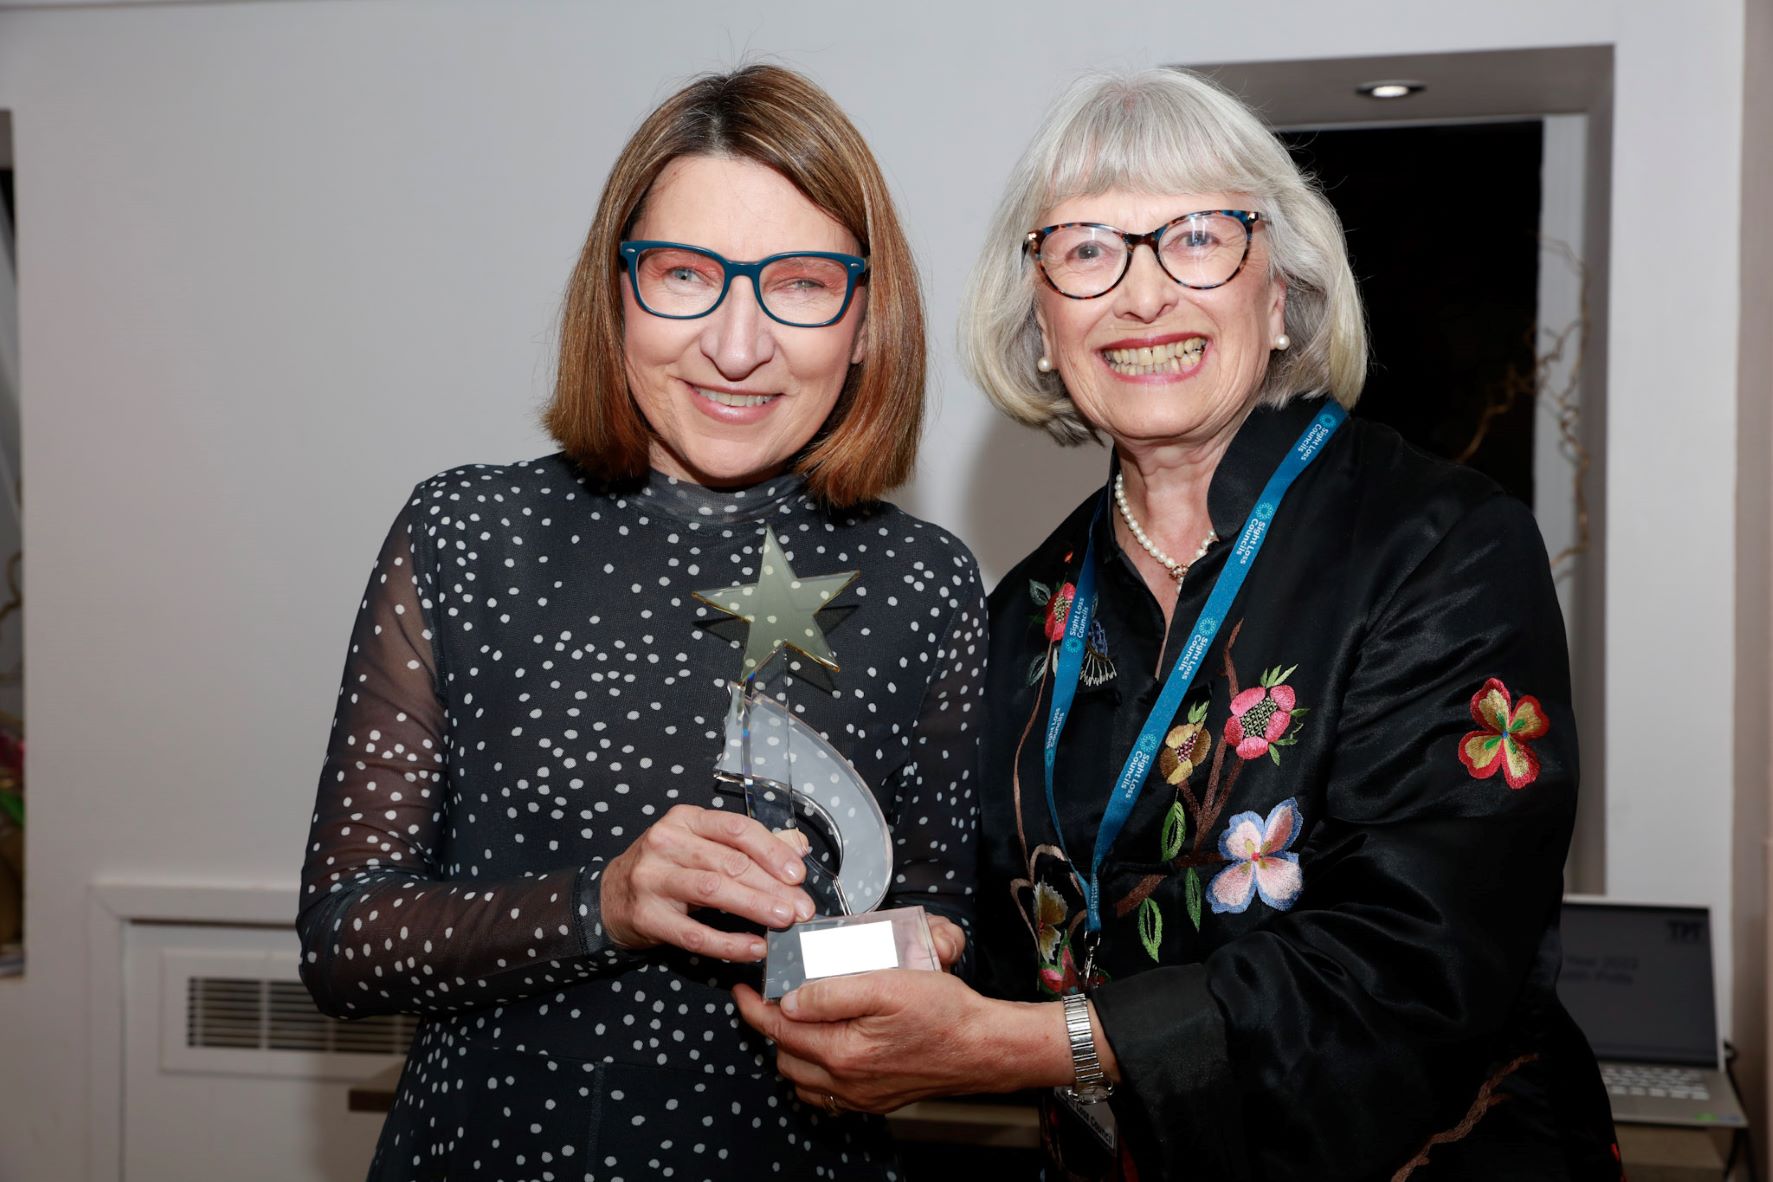 Julie lee of Merseyside SLC, with TPT trustee, Judith Potts. They are both holding Julie's award, smiling at the camera.